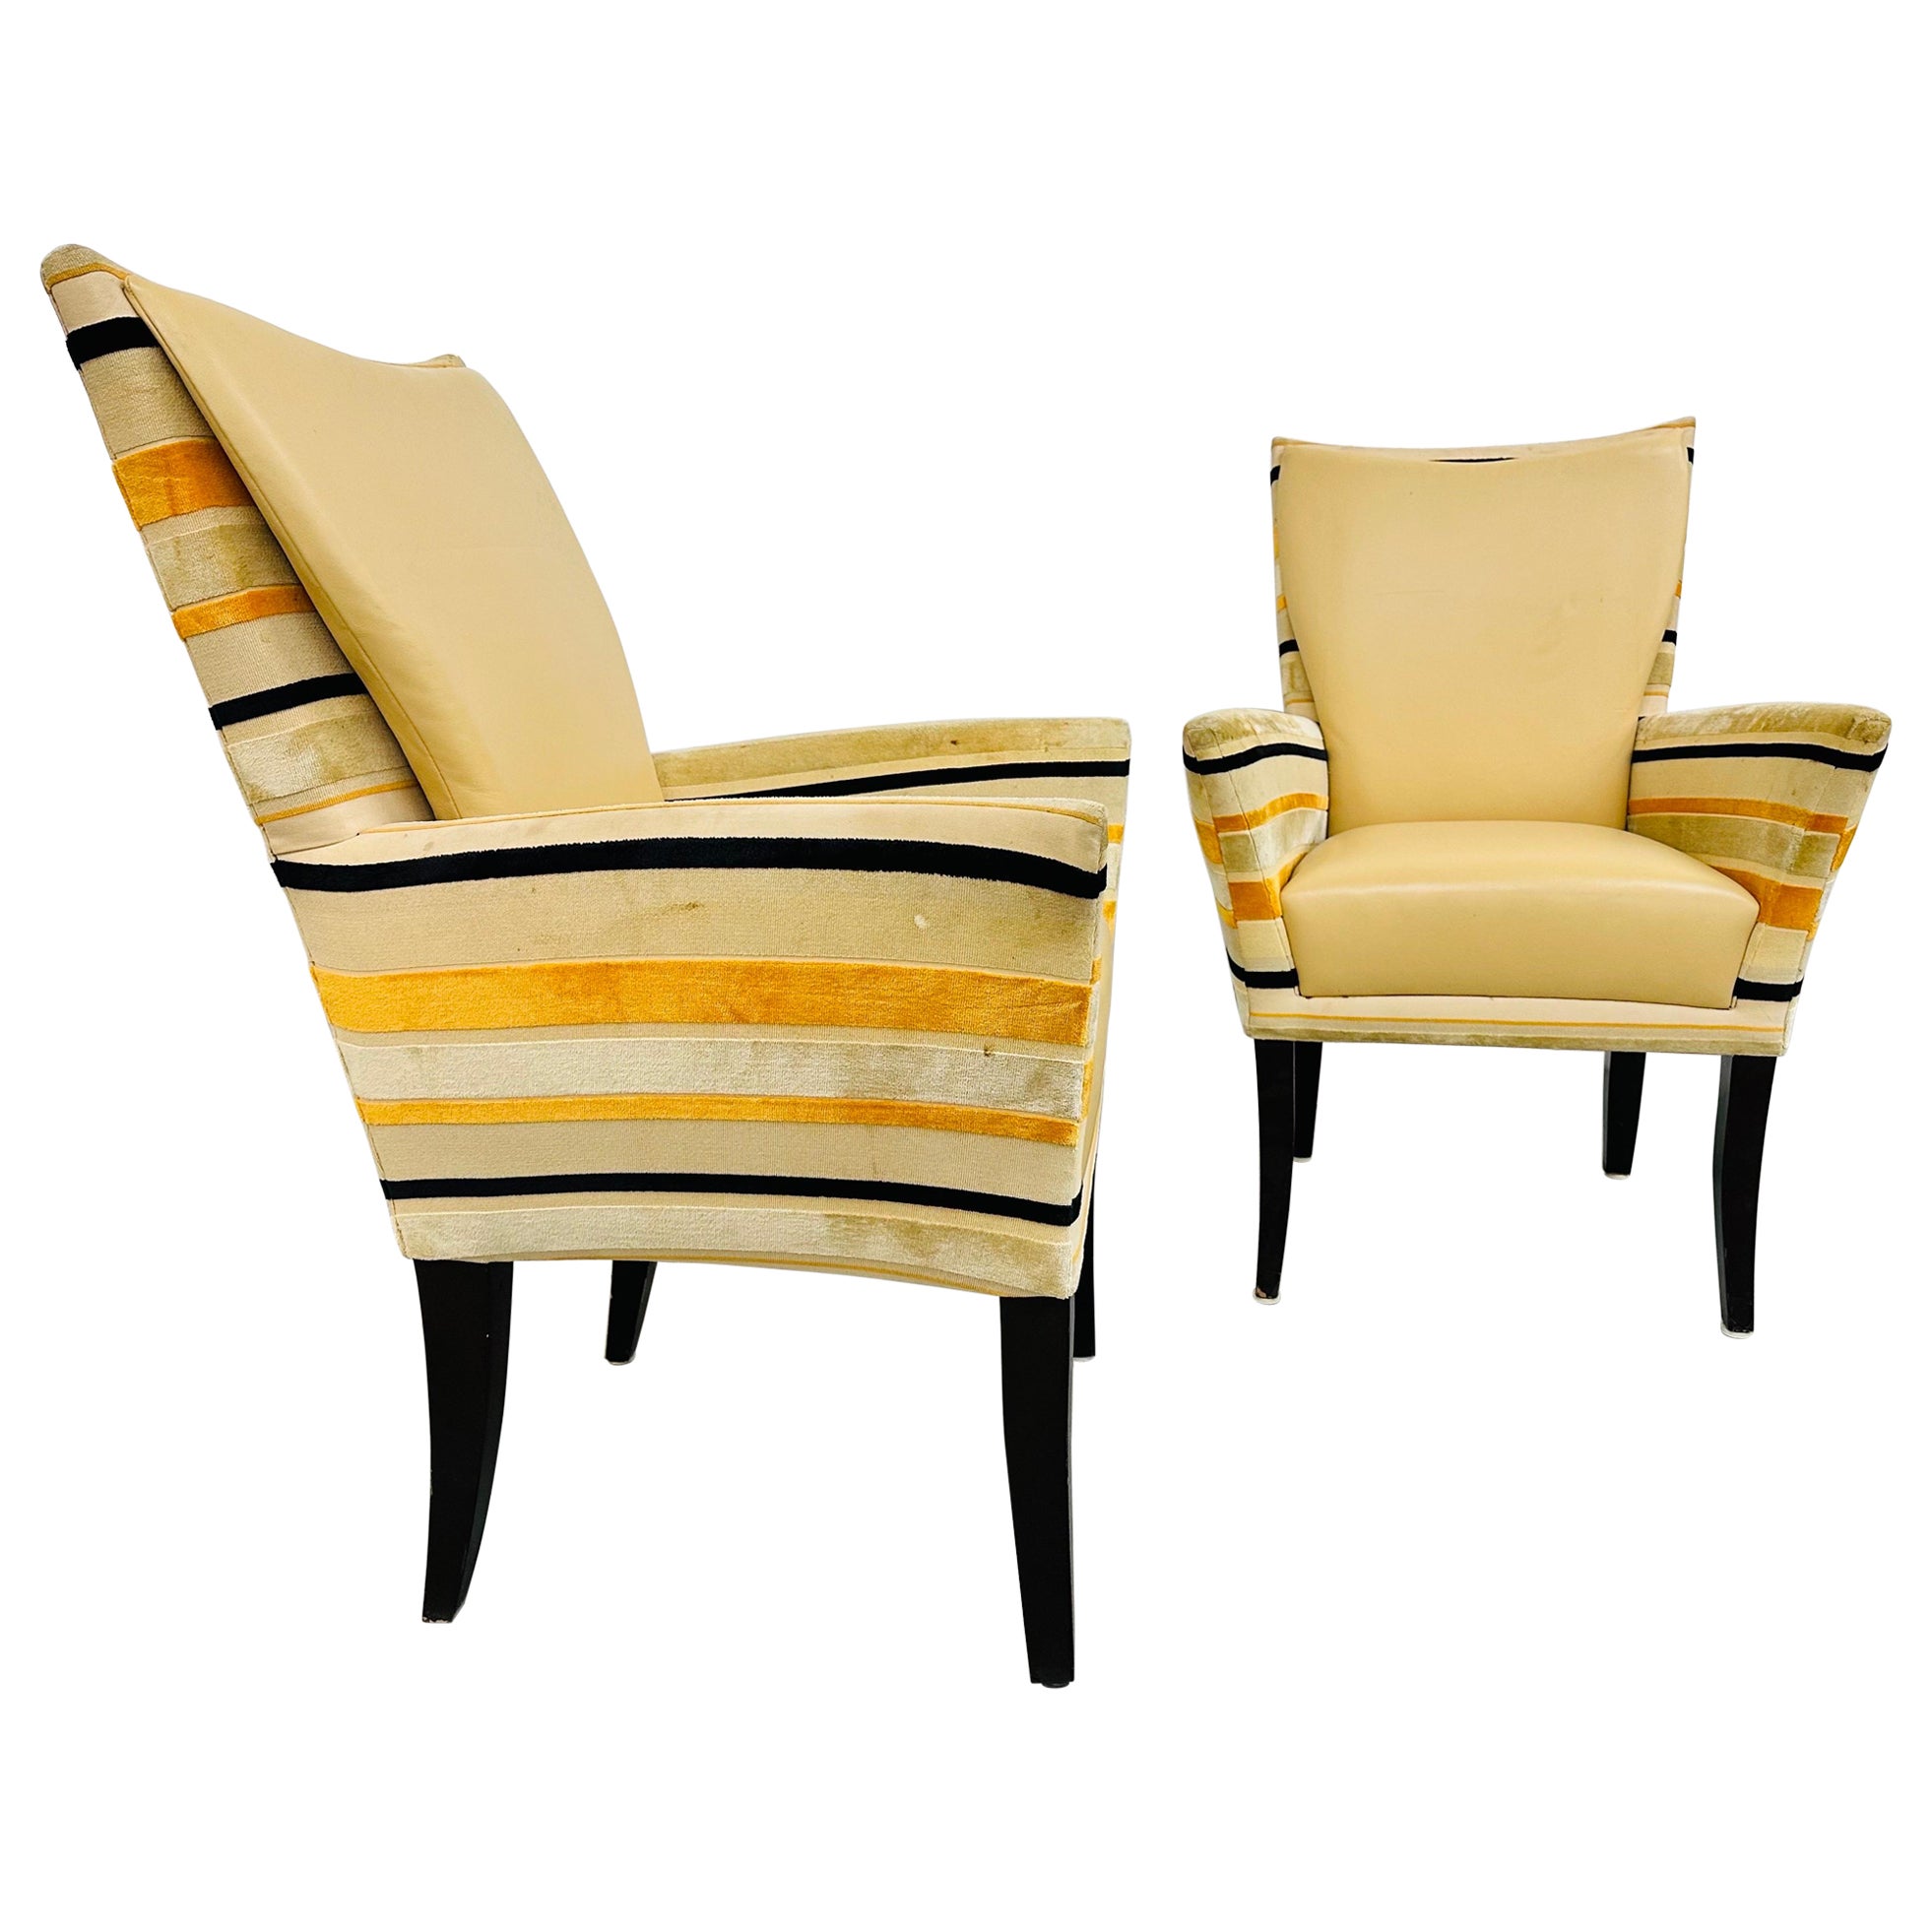 Vintage Deco Style Lounge Chairs - Set of 2 For Sale